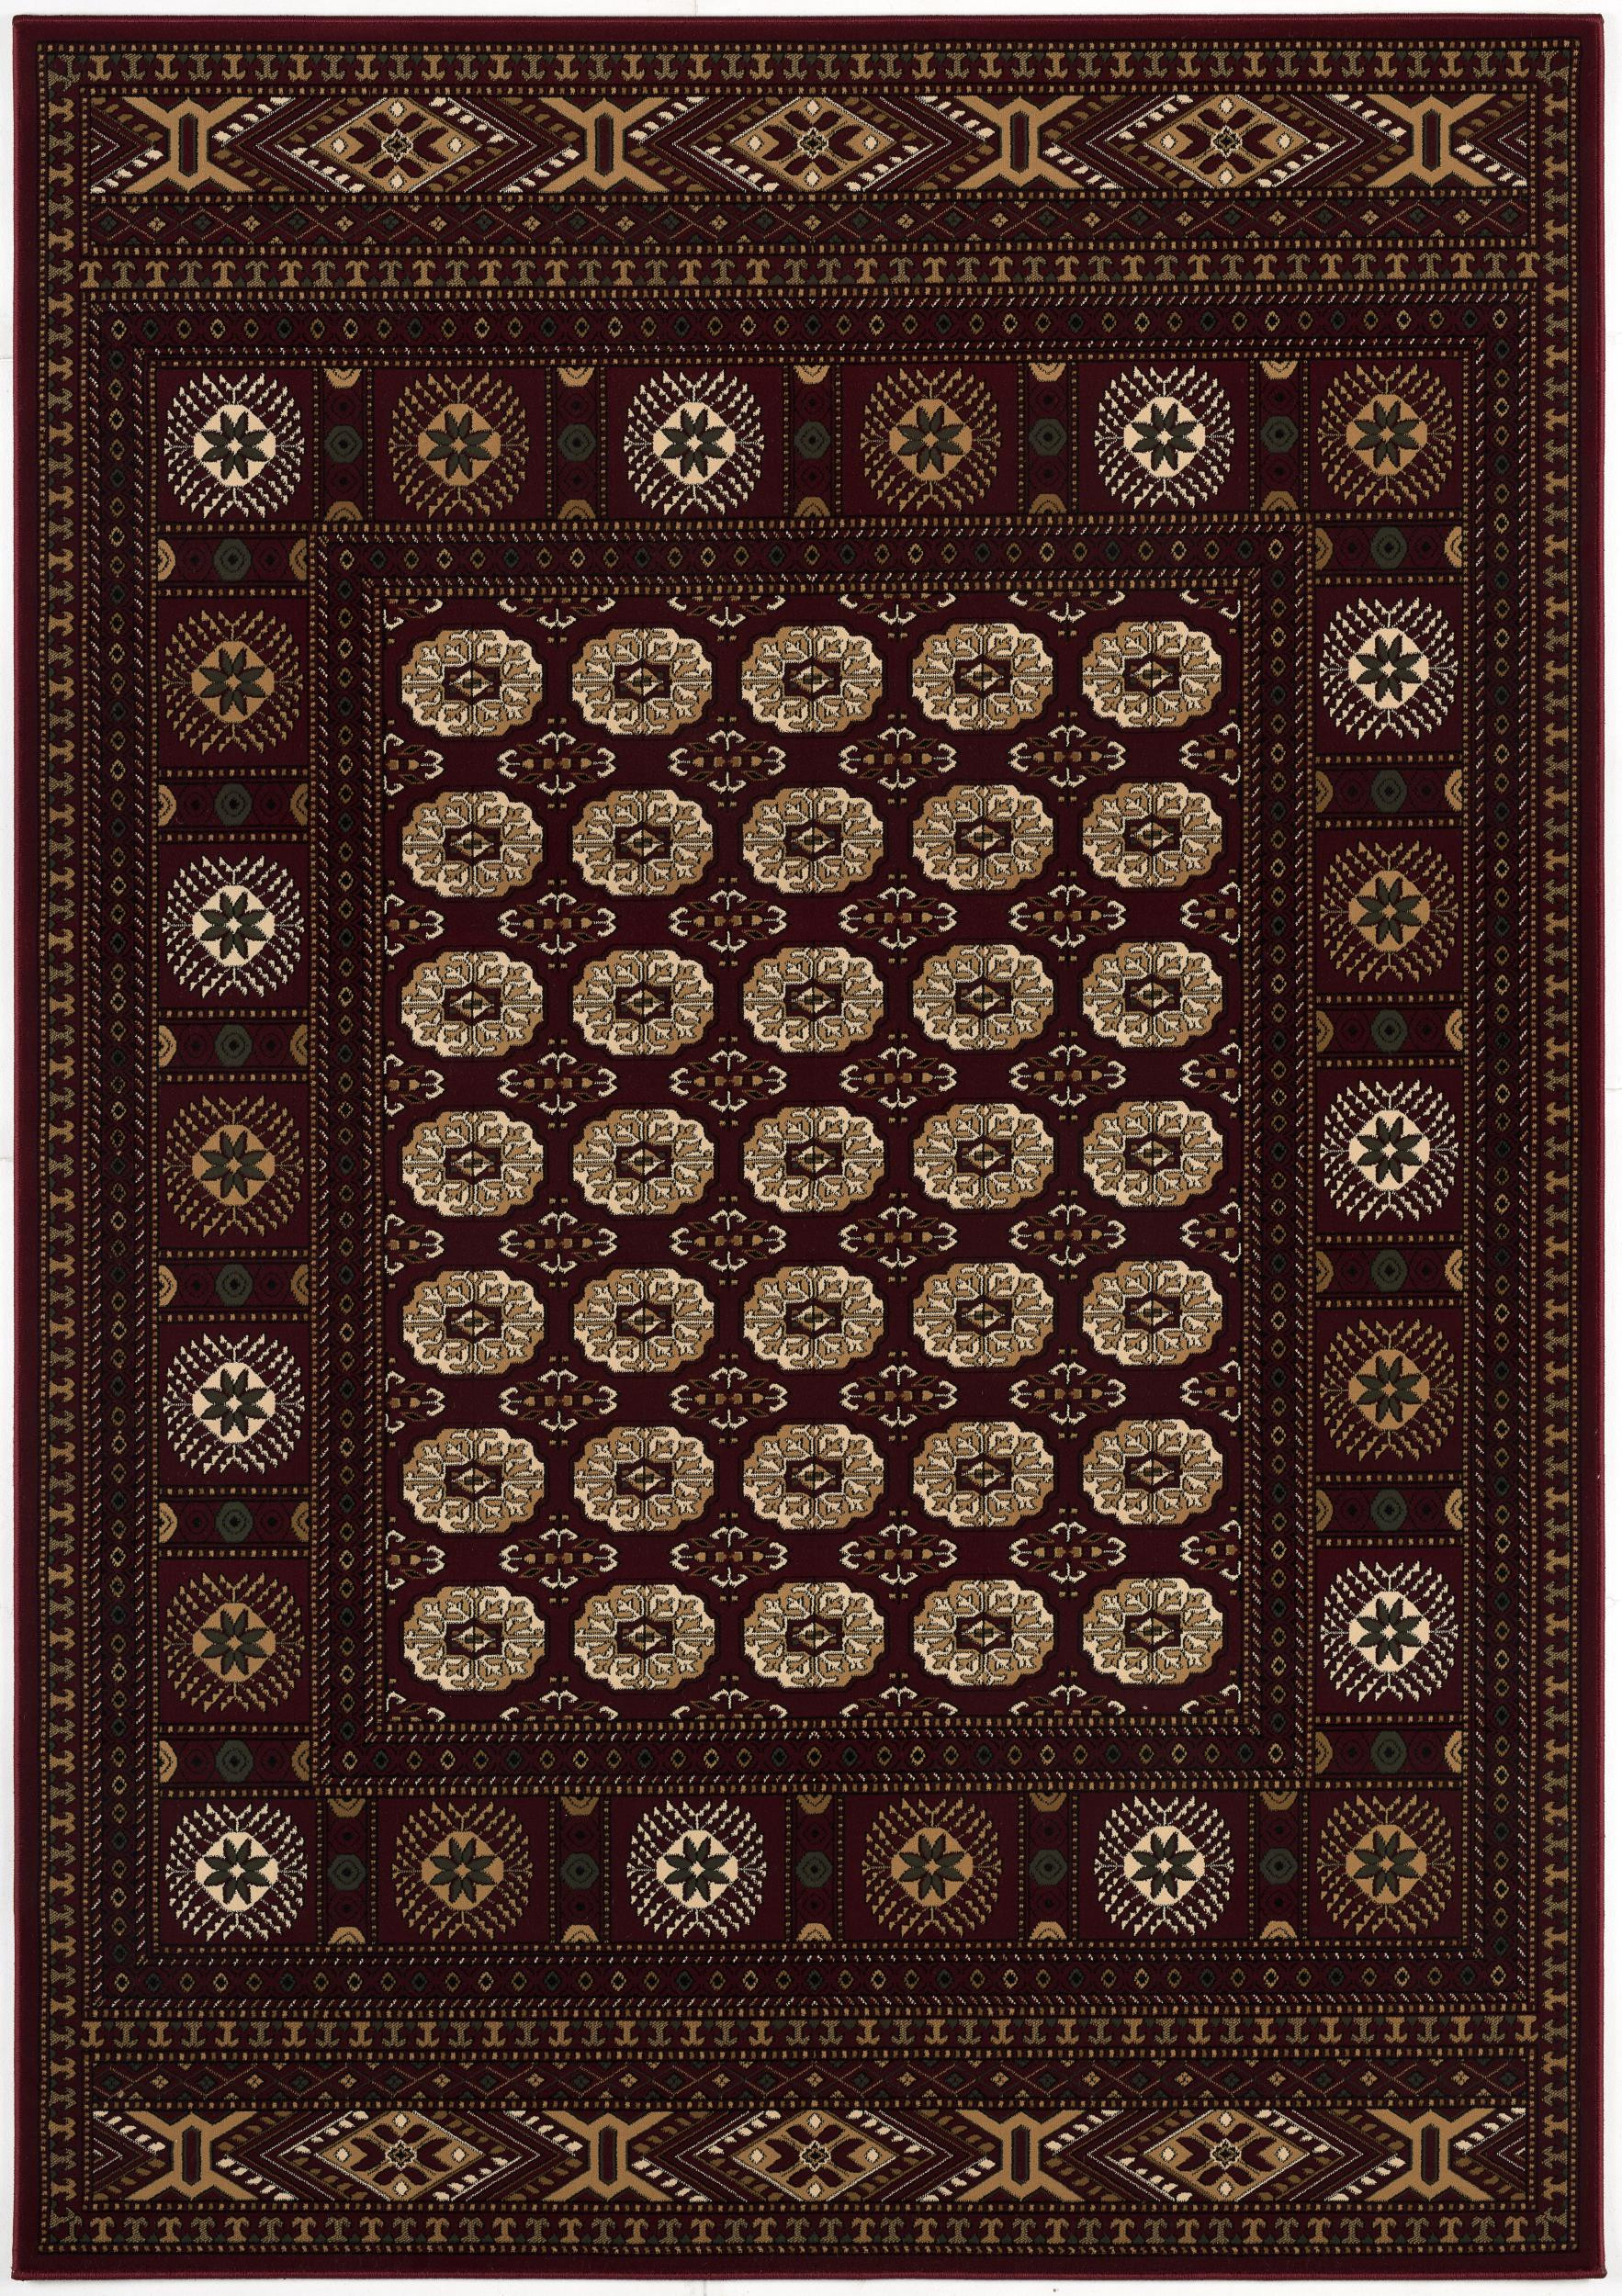 2’ x 13’ Red Eclectic Geometric Pattern Runner Rug-395453-1